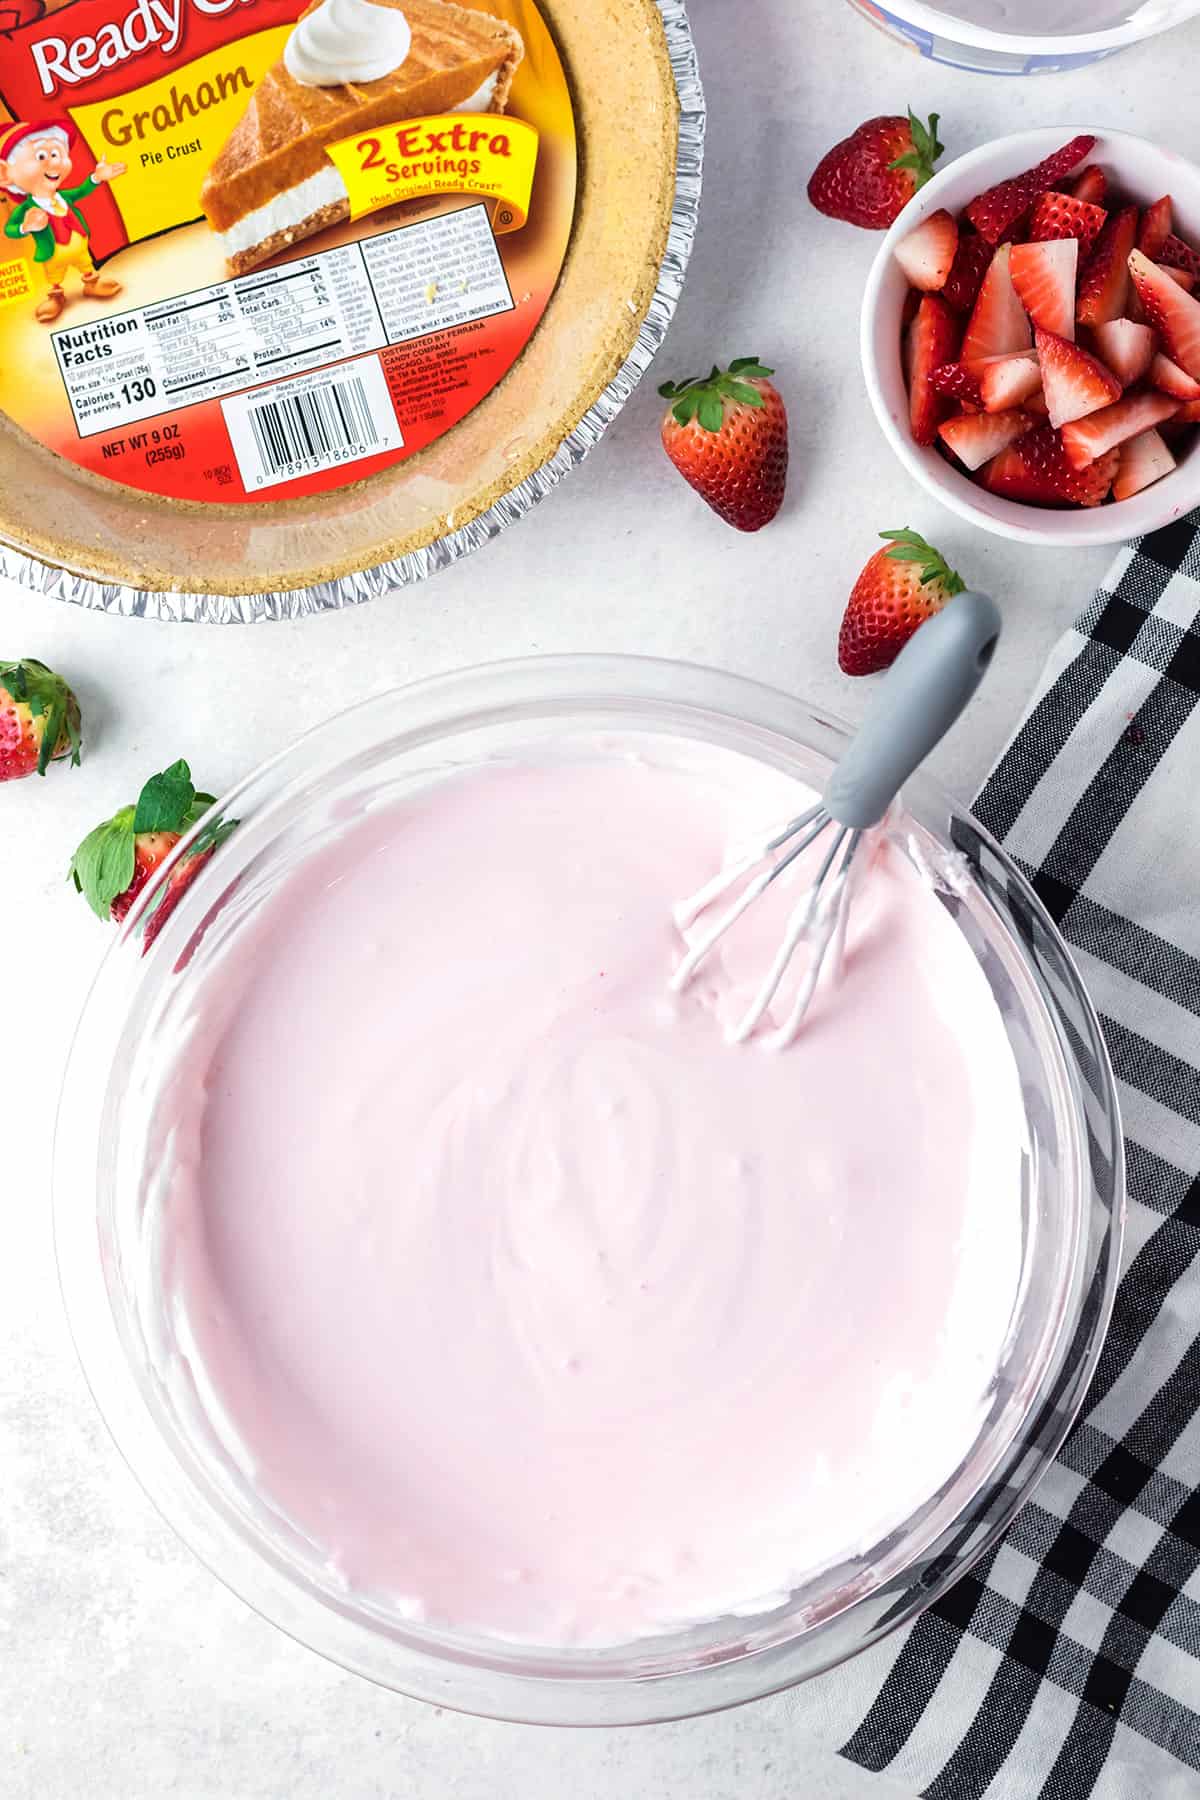 Jello and topping whisked together until smooth.